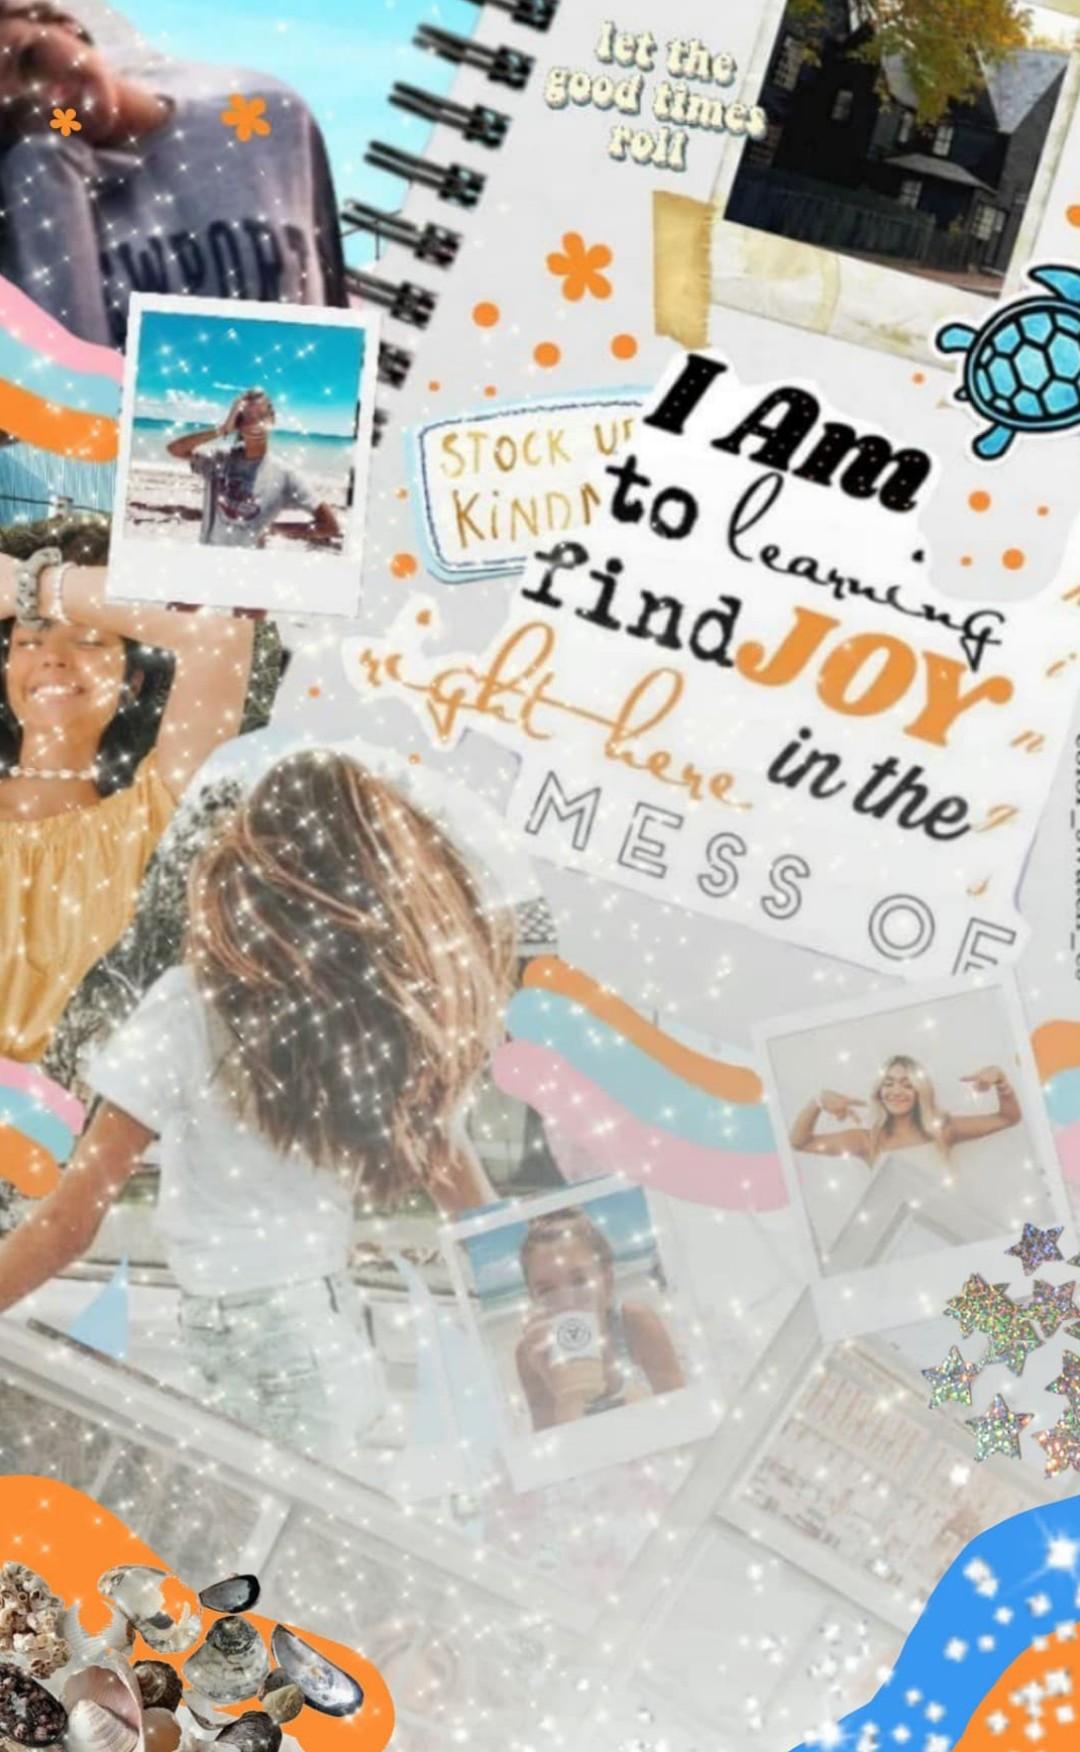 Collab with. . .
the AMAZING sunny-dreams! she is sooo talented guys, go followe her! we were going for a scrapbook look. . . she did the stynning background and I did the text and some pngs.